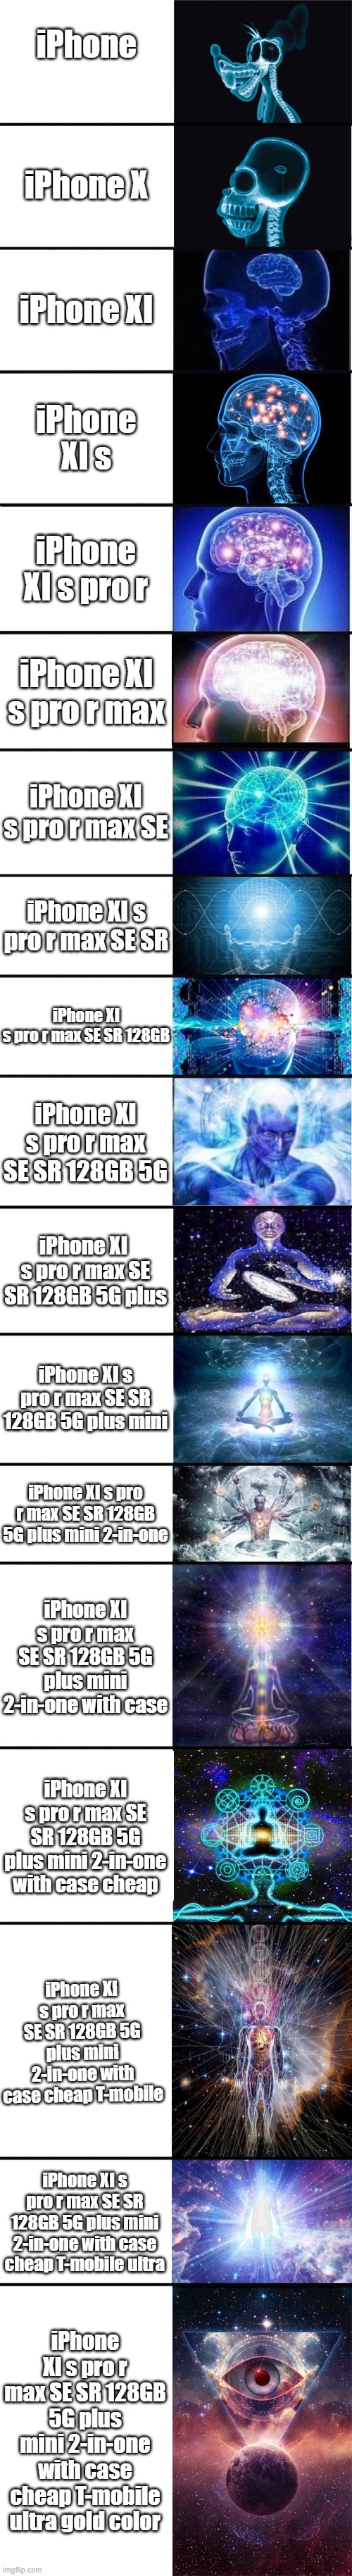 iPhone XI s pro r max SE SR 128GB 5G plus mini 2-in-one with case cheap T-mobile ultra | iPhone; iPhone X; iPhone XI; iPhone XI s; iPhone XI s pro r; iPhone XI s pro r max; iPhone XI s pro r max SE; iPhone XI s pro r max SE SR; iPhone XI s pro r max SE SR 128GB; iPhone XI s pro r max SE SR 128GB 5G; iPhone XI  s pro r max SE SR 128GB 5G plus; iPhone XI s pro r max SE SR 128GB 5G plus mini; iPhone XI s pro r max SE SR 128GB 5G plus mini 2-in-one; iPhone XI s pro r max SE SR 128GB 5G plus mini 2-in-one with case; iPhone XI s pro r max SE SR 128GB 5G plus mini 2-in-one with case cheap; iPhone XI s pro r max SE SR 128GB 5G plus mini 2-in-one with case cheap T-mobile; iPhone XI s pro r max SE SR 128GB 5G plus mini 2-in-one with case cheap T-mobile ultra; iPhone XI s pro r max SE SR 128GB 5G plus mini 2-in-one with case cheap T-mobile ultra gold color | image tagged in expanding brain 9001 | made w/ Imgflip meme maker